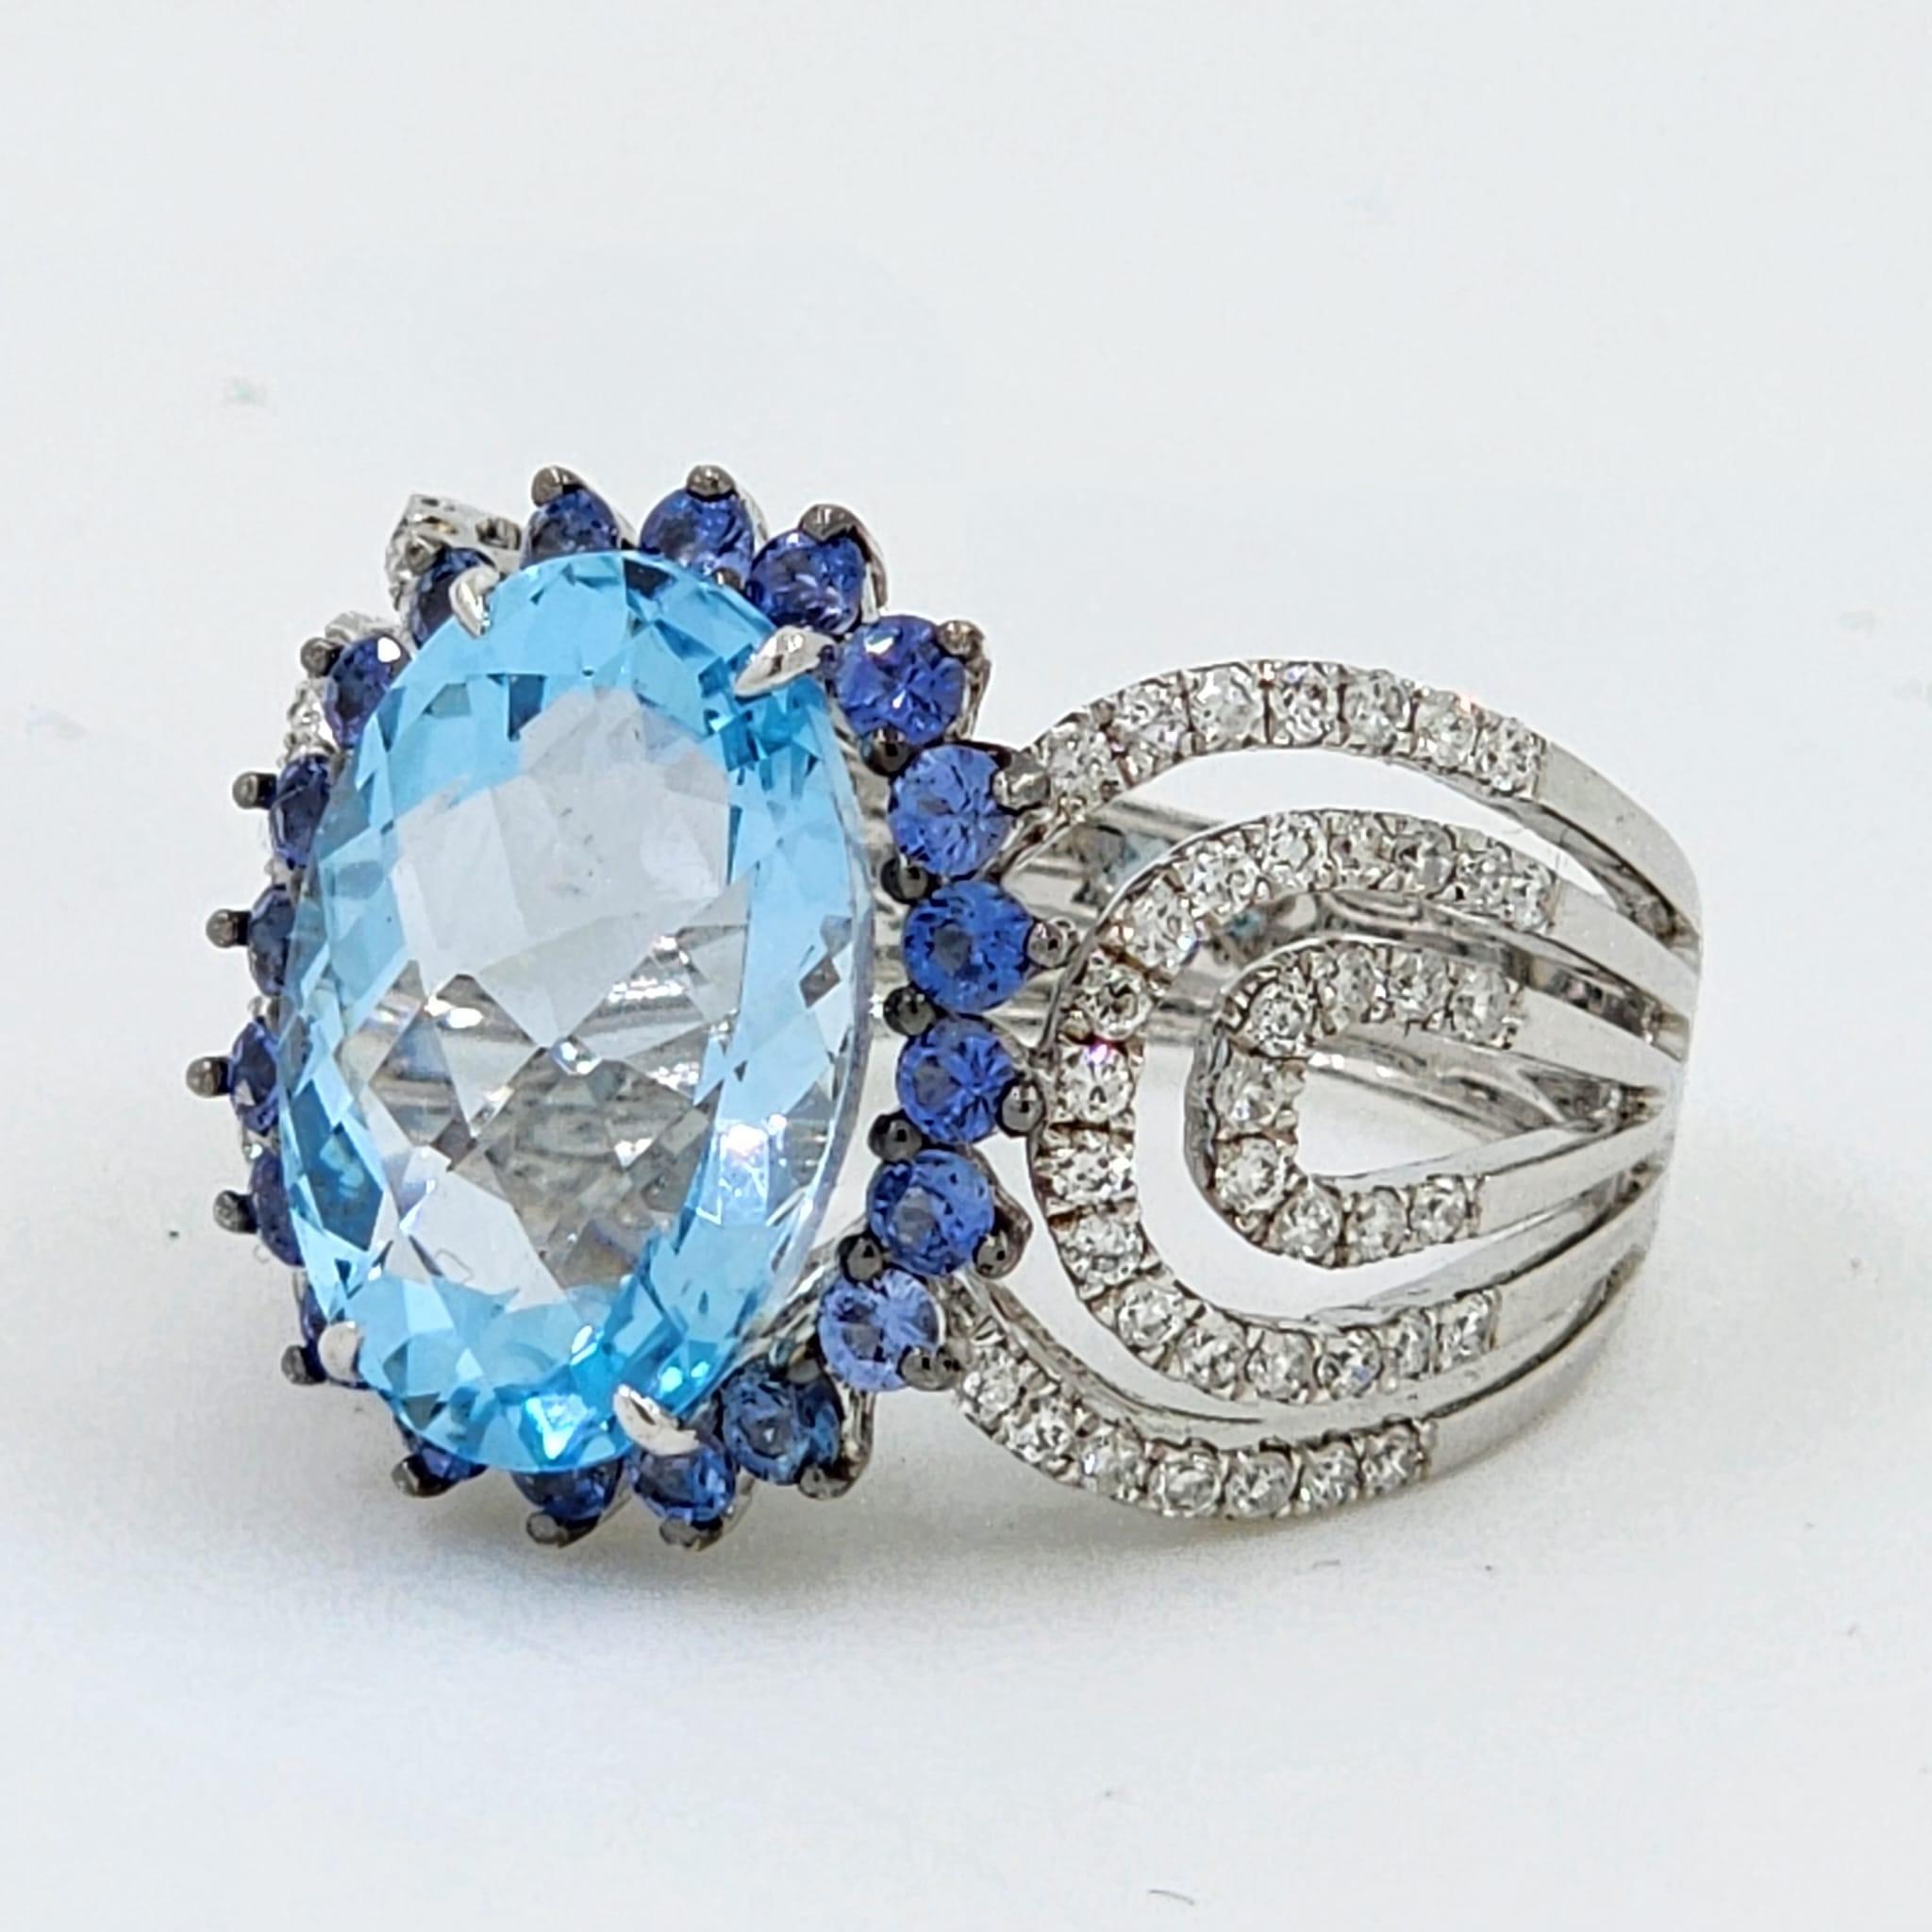 This cocktail ring features a faceted oval cut blue topaz weight 6.96 carats in the center, the center blue topaz is surrounded by 0.71 carats of blue sapphire. The shoulder of the ring is set with 0.55 carats of white round